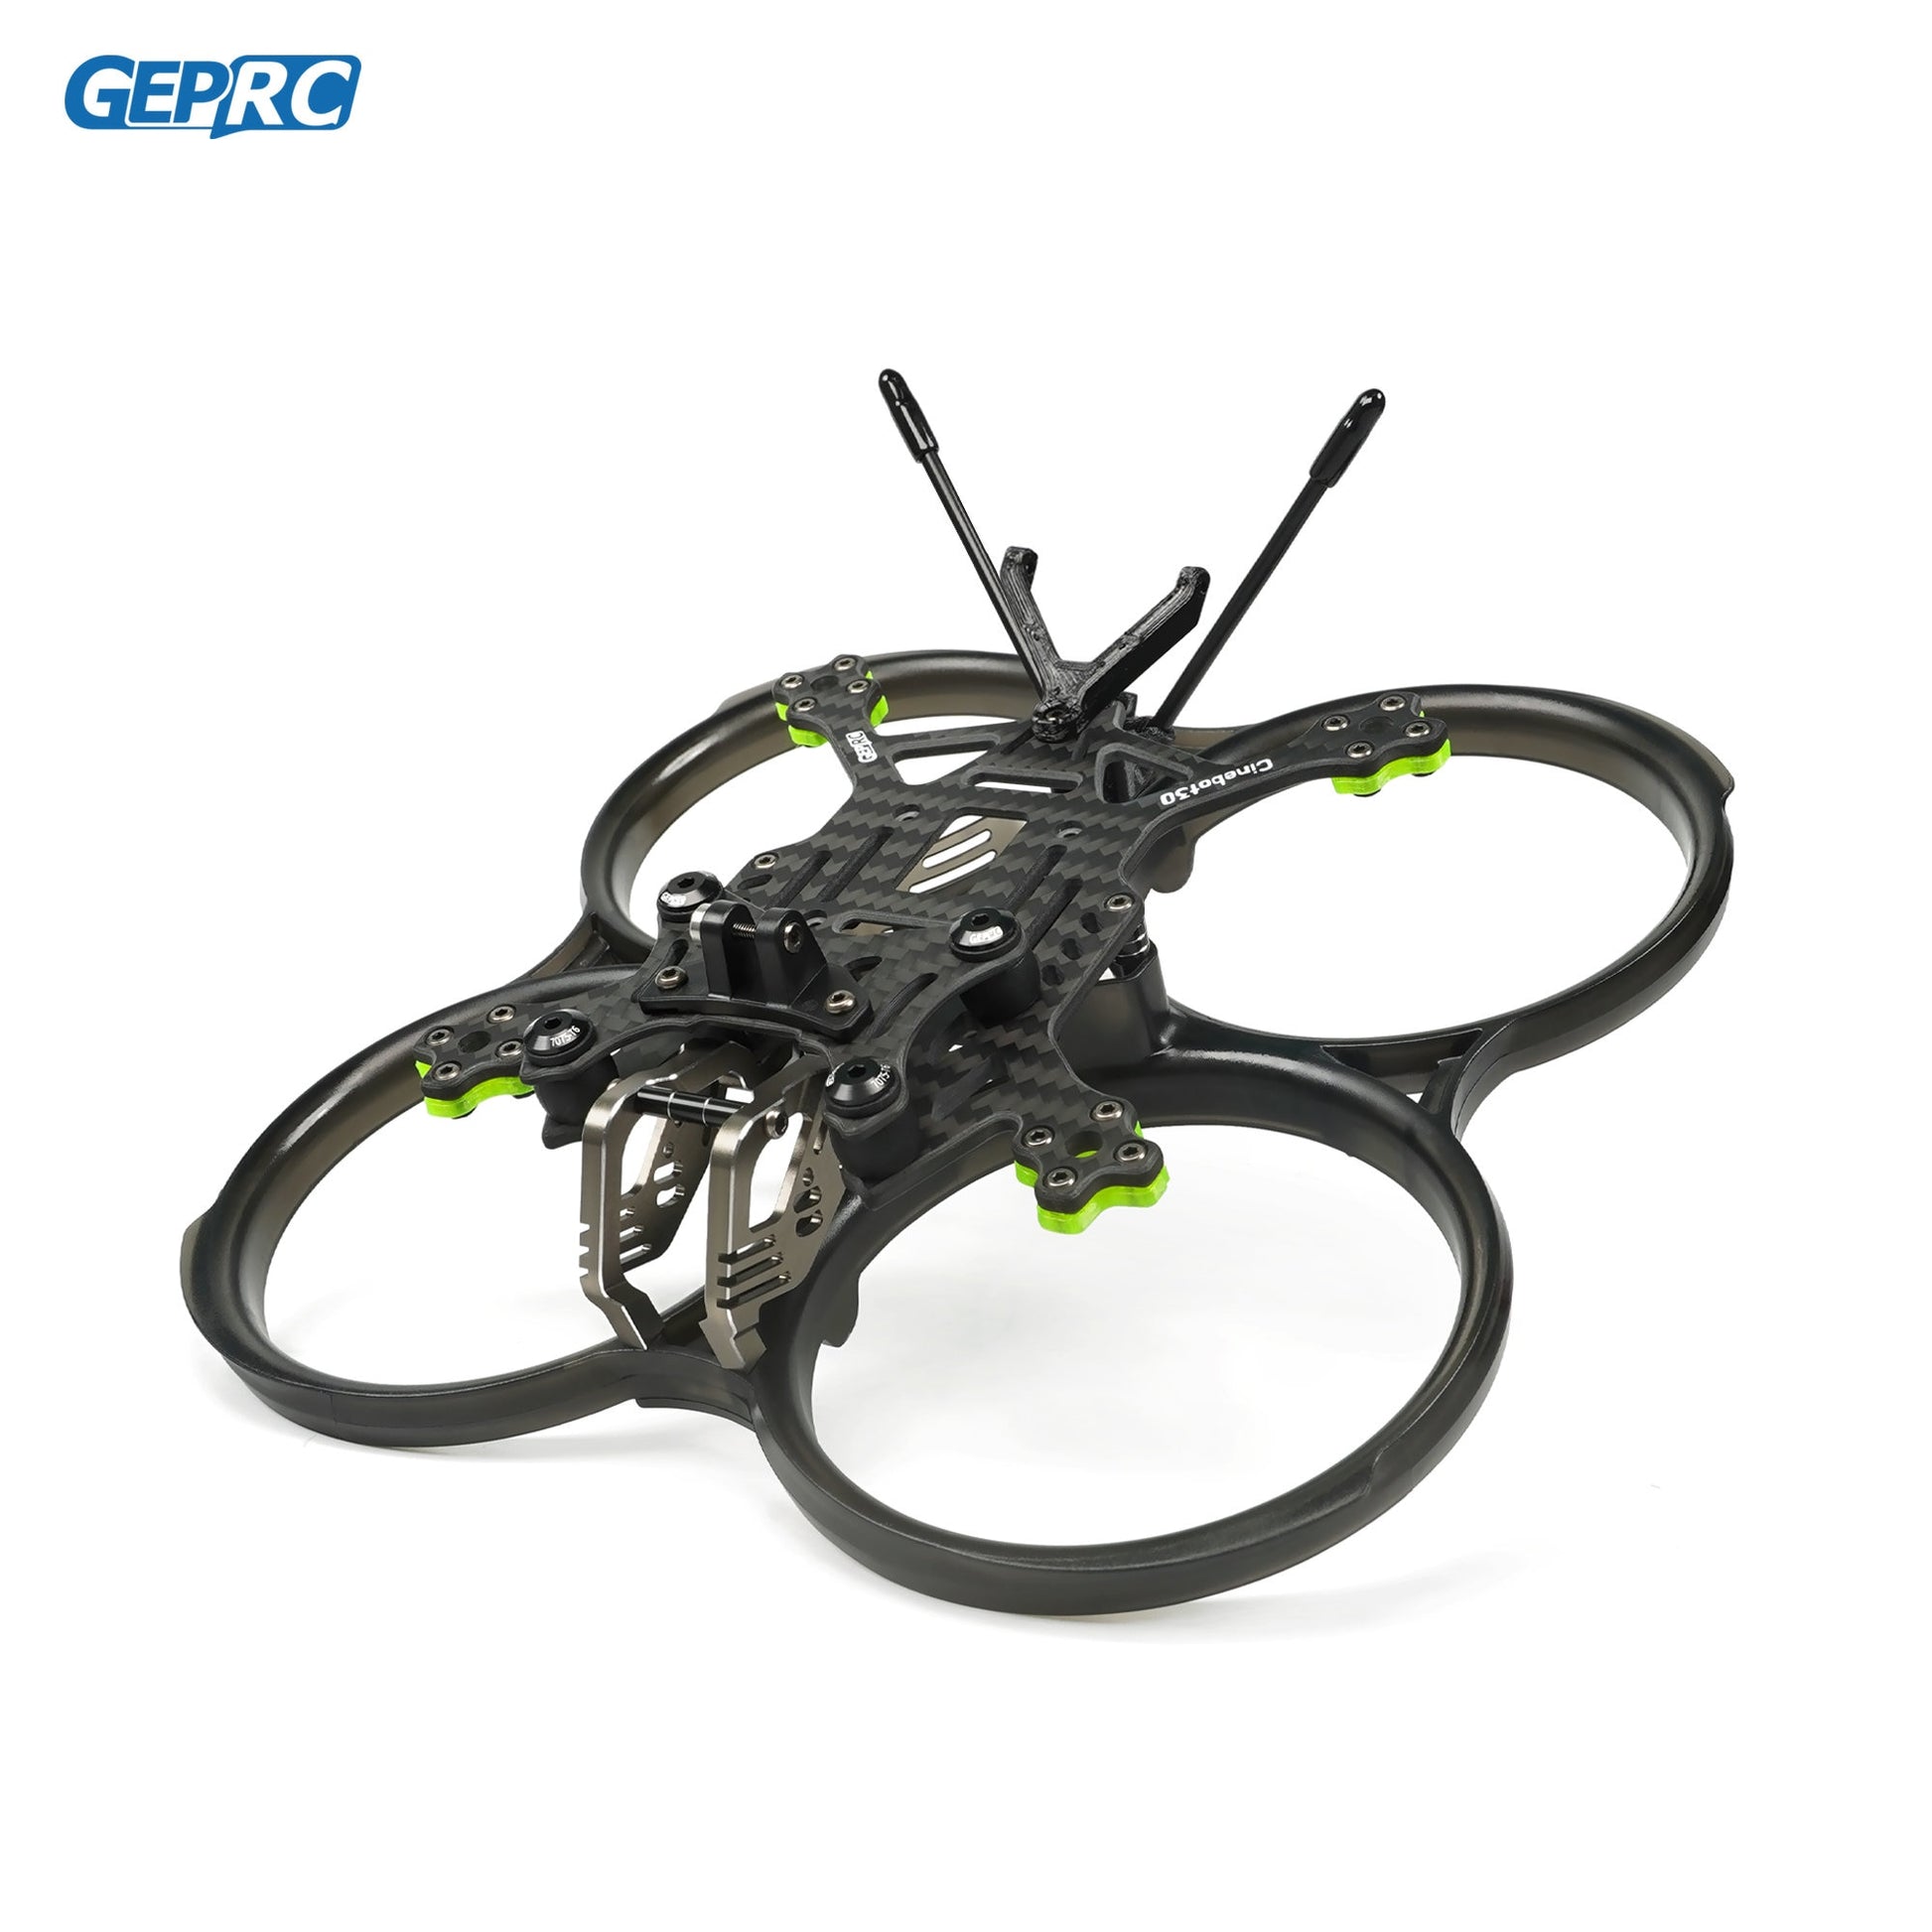 GEPRC 3inch Propeller GEP-CT30 103.2g Quadcopter Frame - FPV Freestyle RC Racing Drone Cinebot30